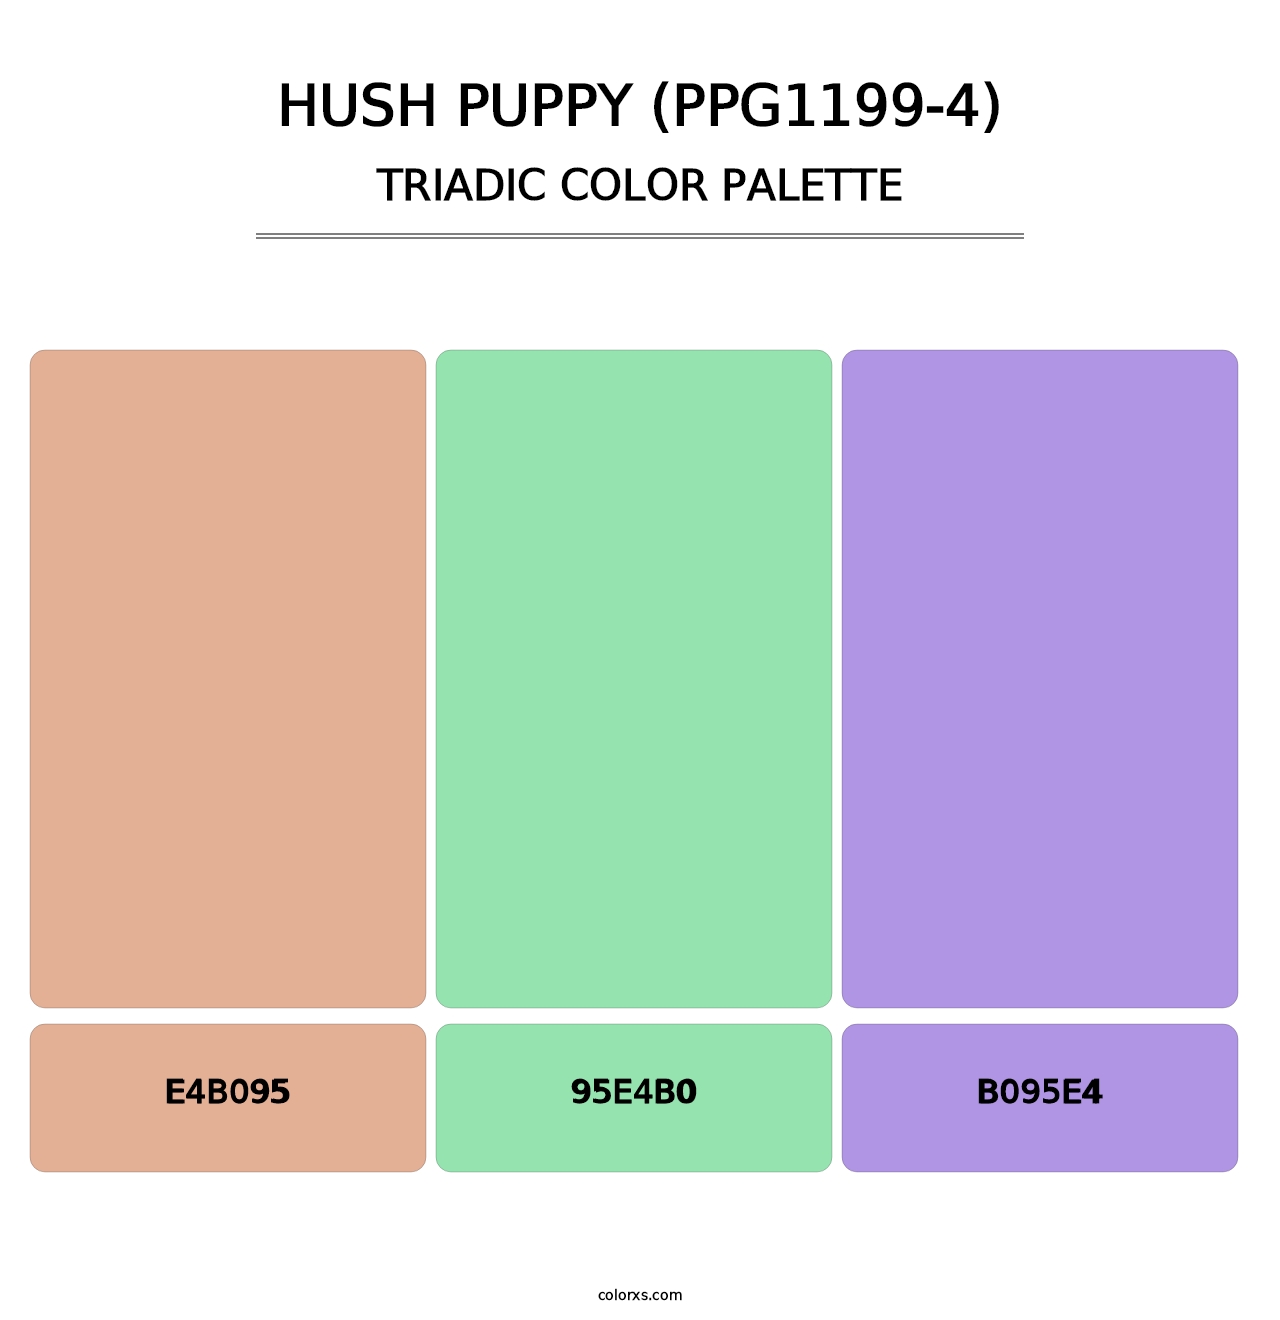 Hush Puppy (PPG1199-4) - Triadic Color Palette